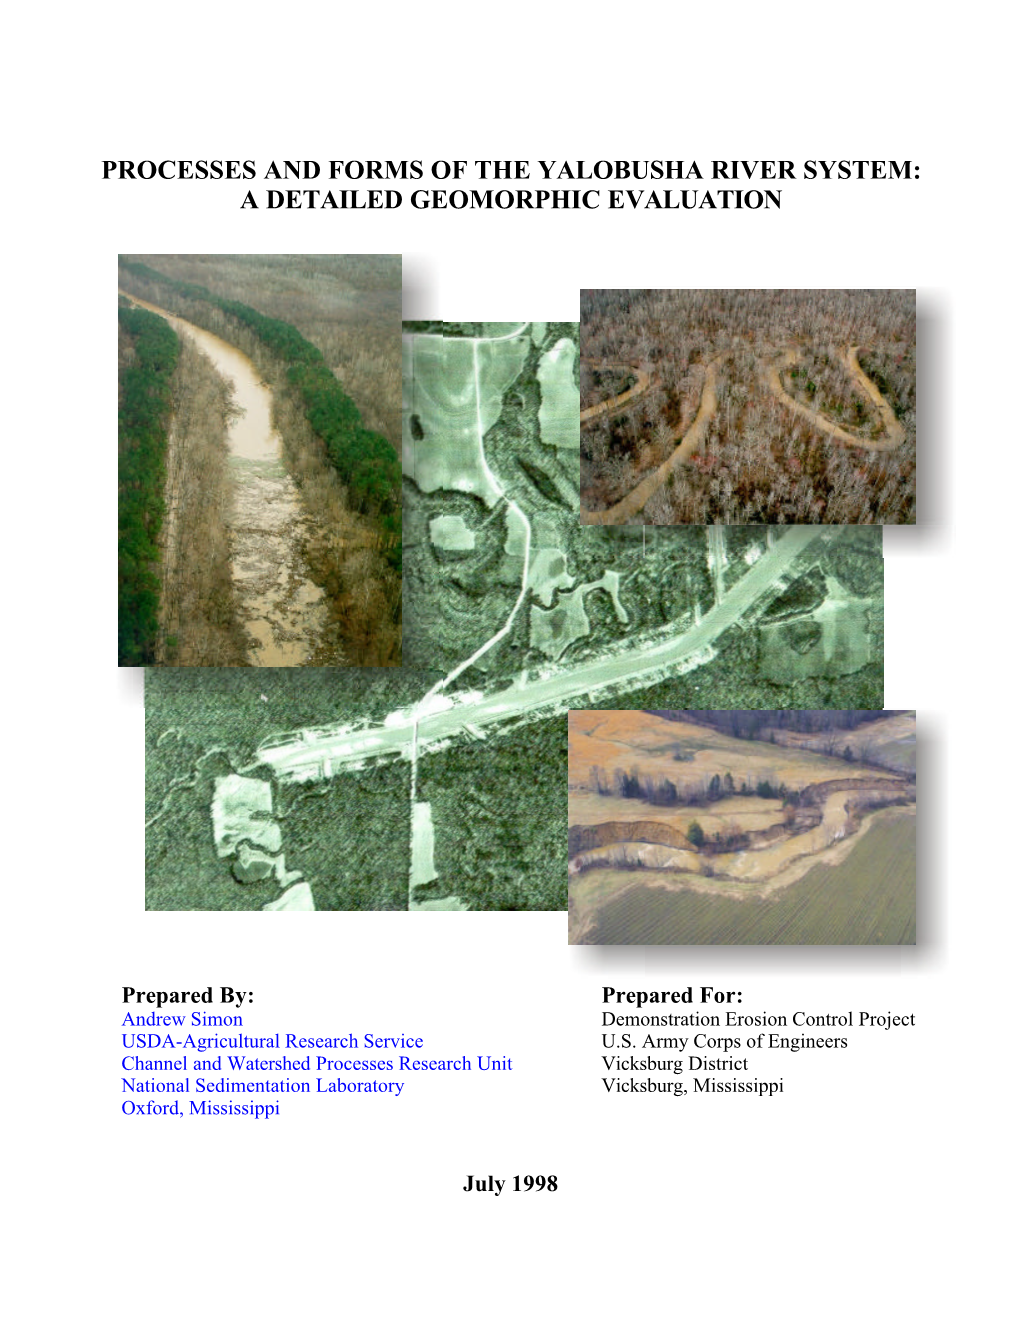 Processes and Forms of the Yalobusha River System